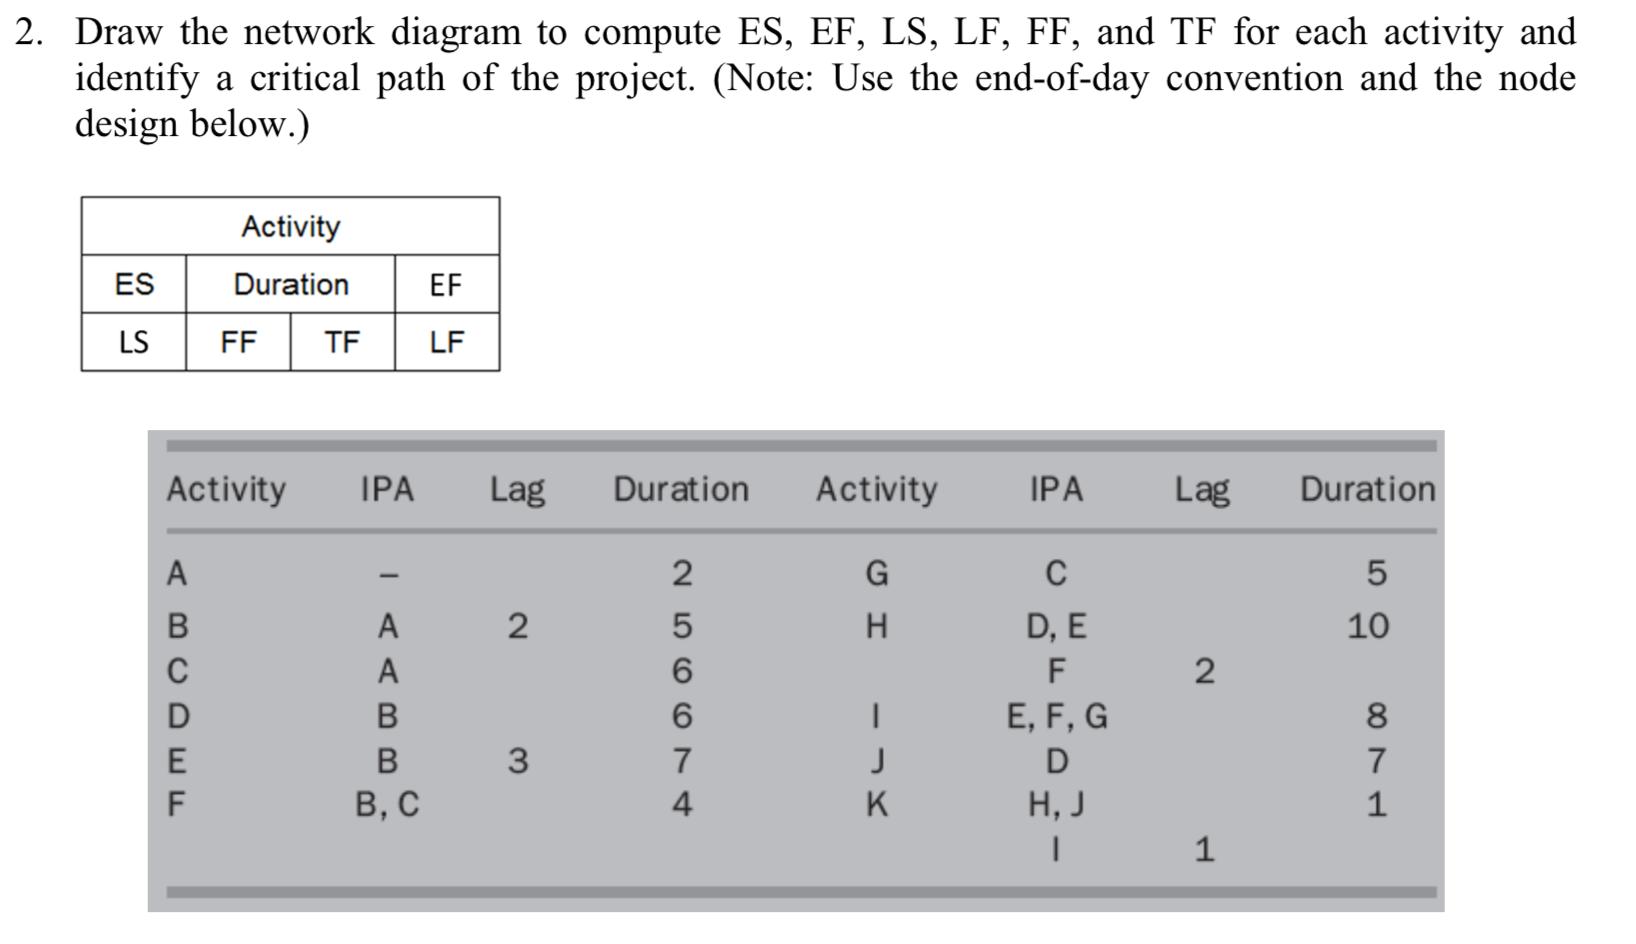 2. Draw the network diagram to compute ES, EF, LS, LF, FF, and TF for each activity and identify a critical